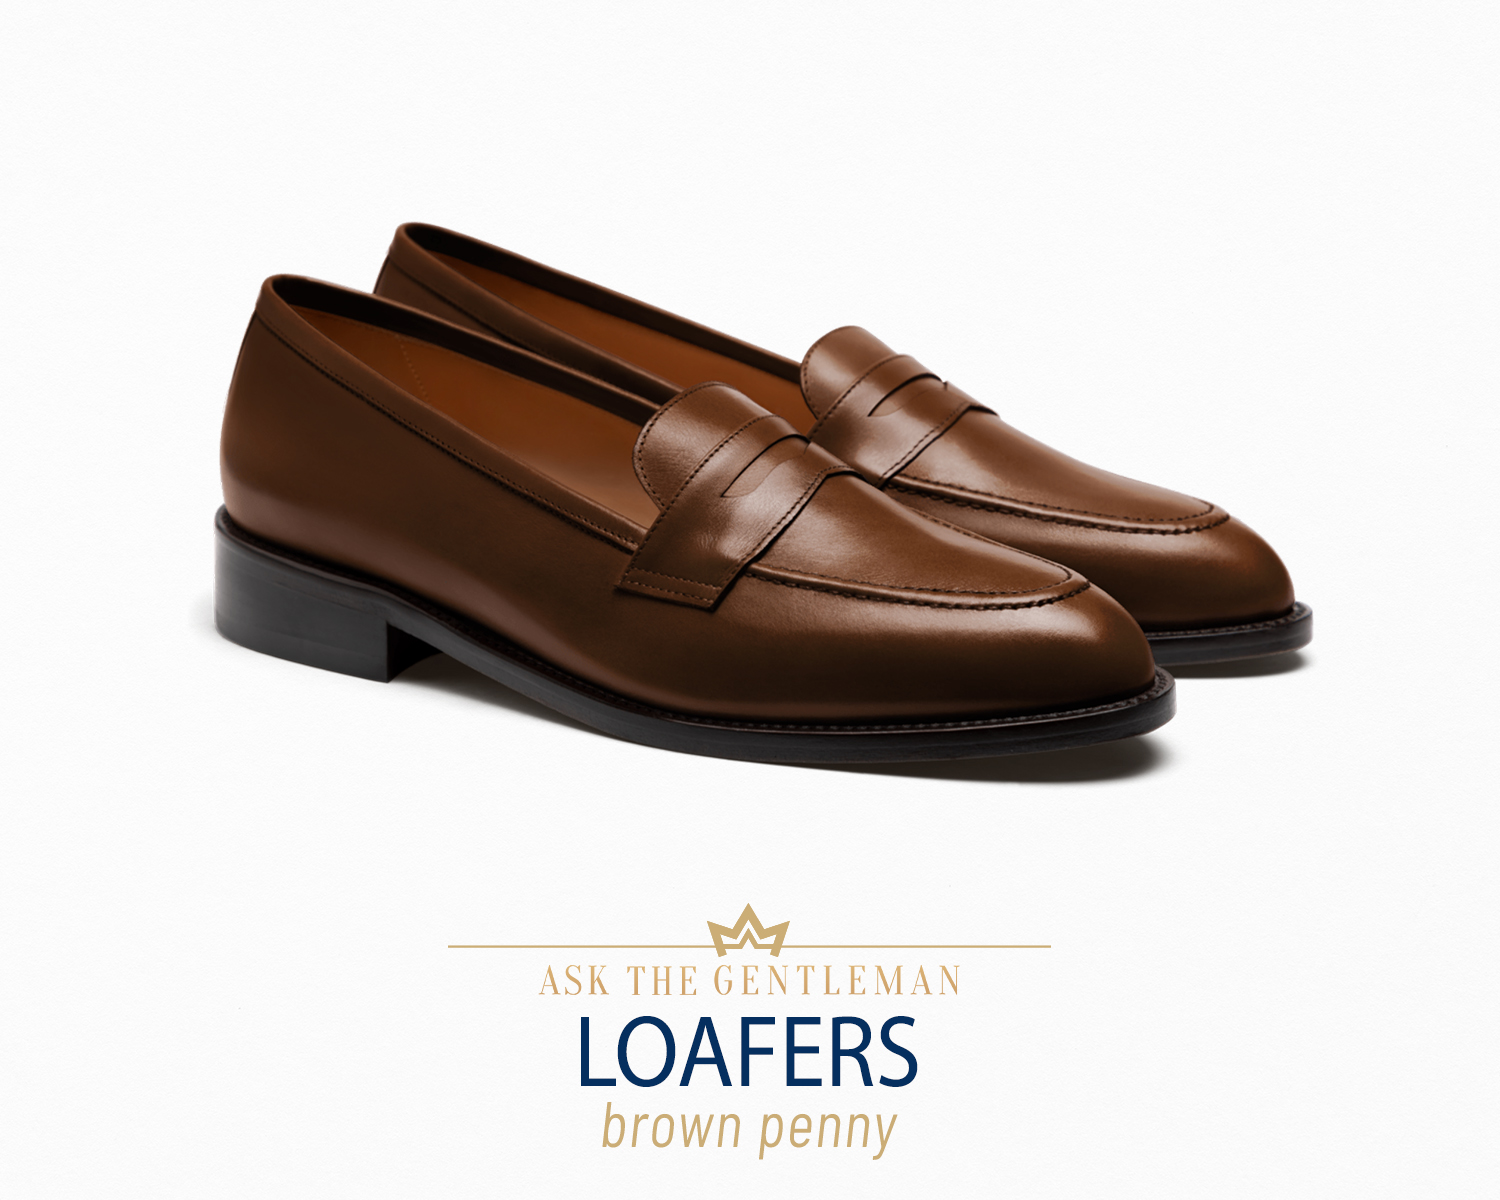 Brown penny loafer shoe type